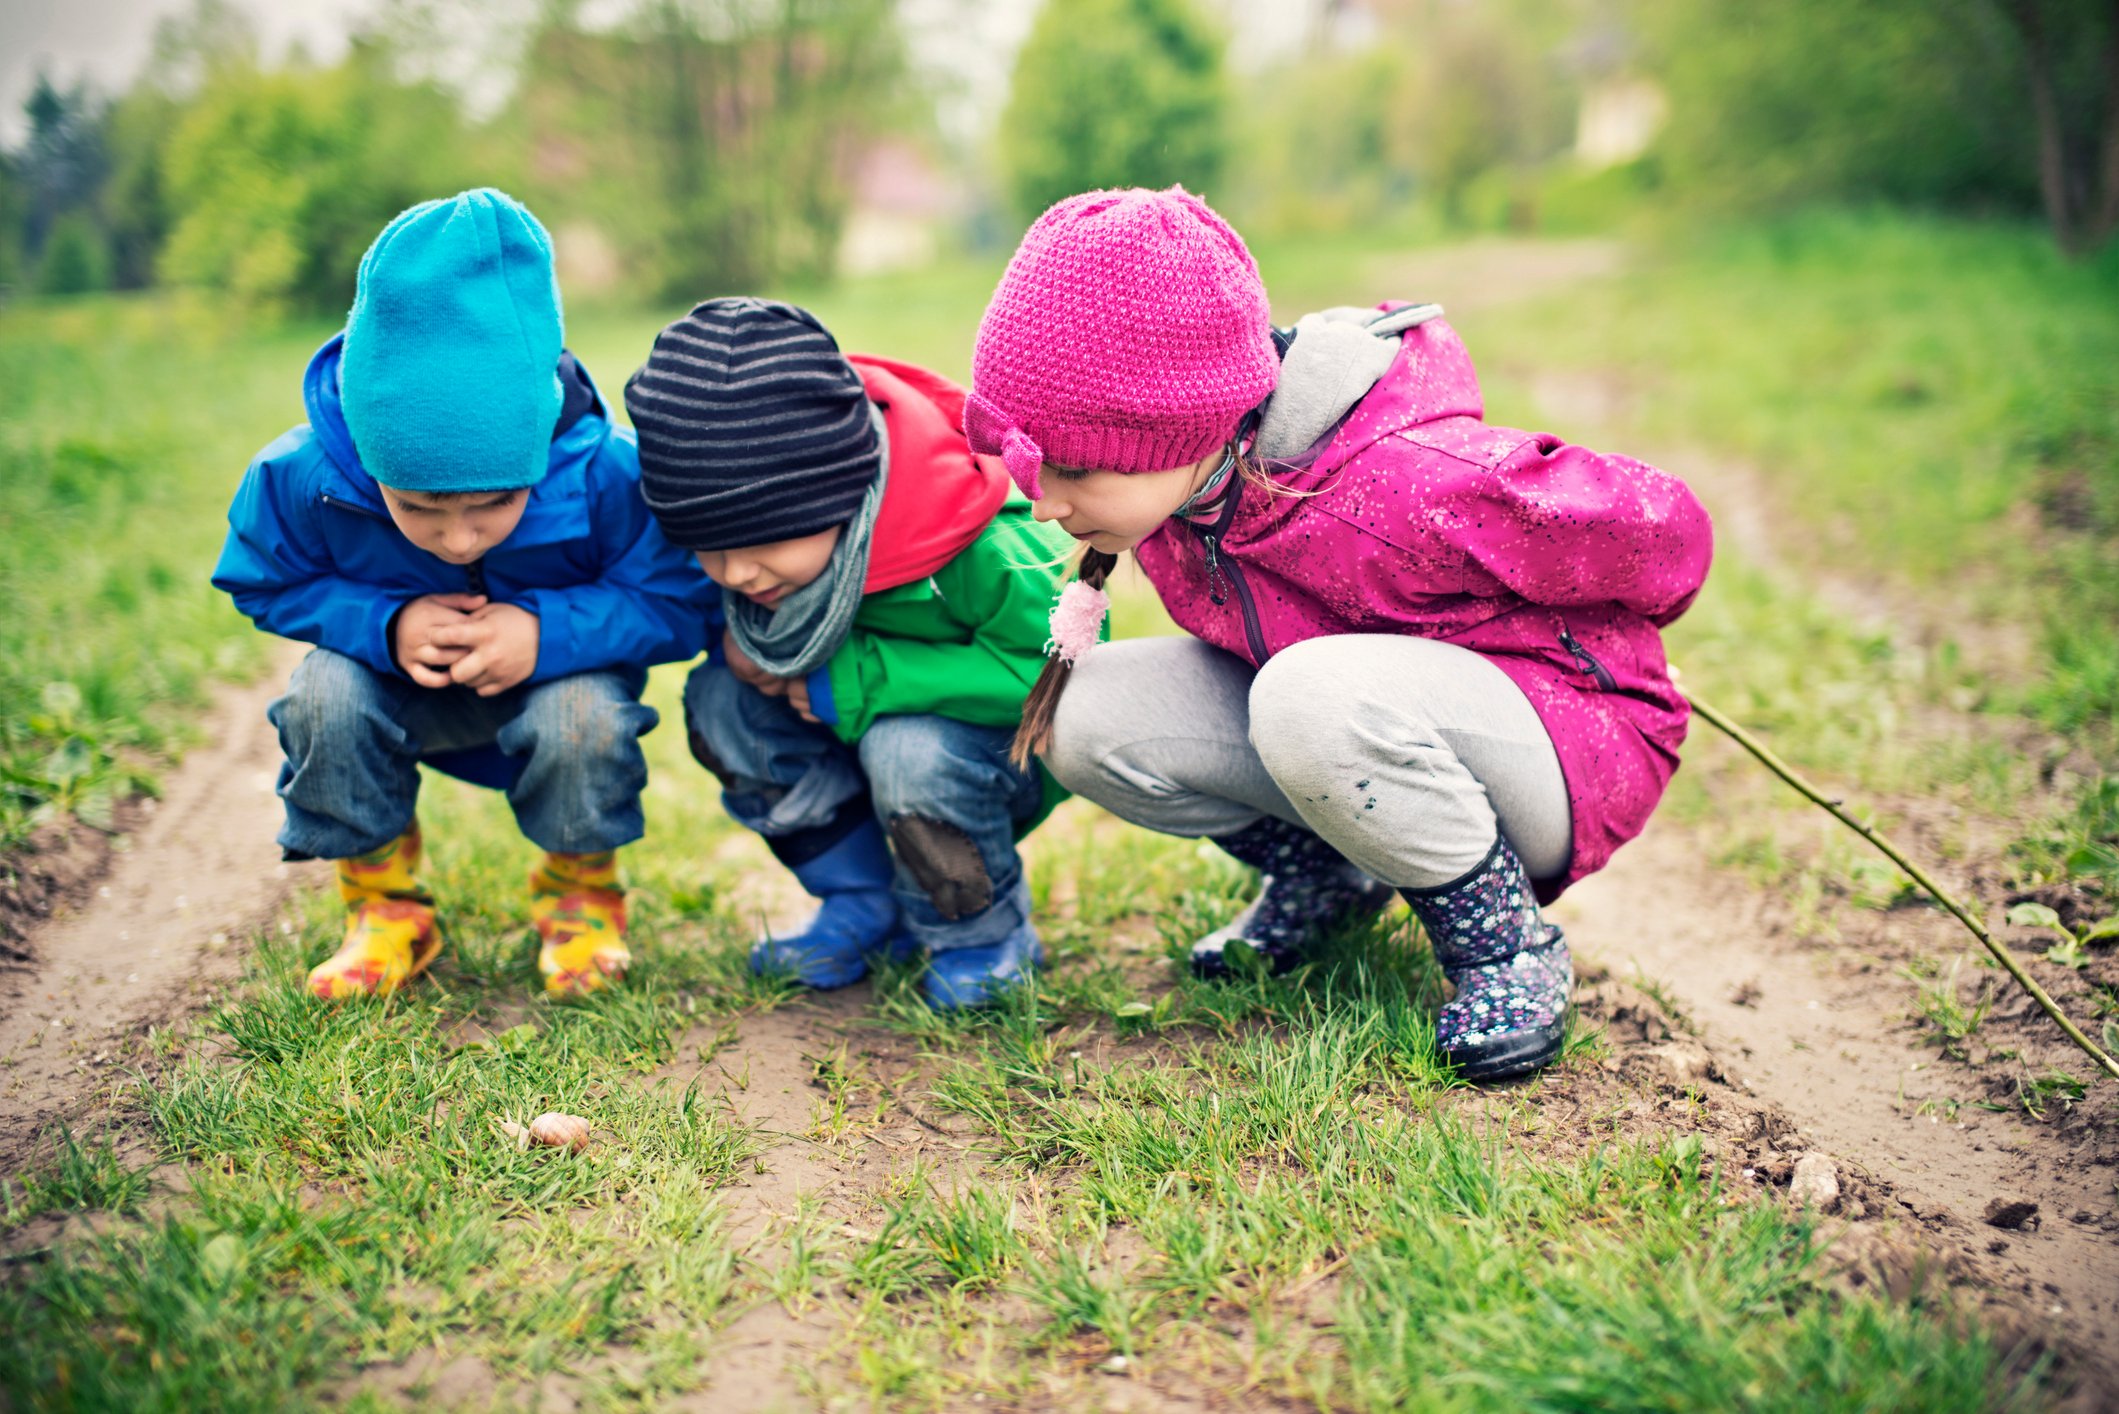 Three preschoolers examining a snail in the grass